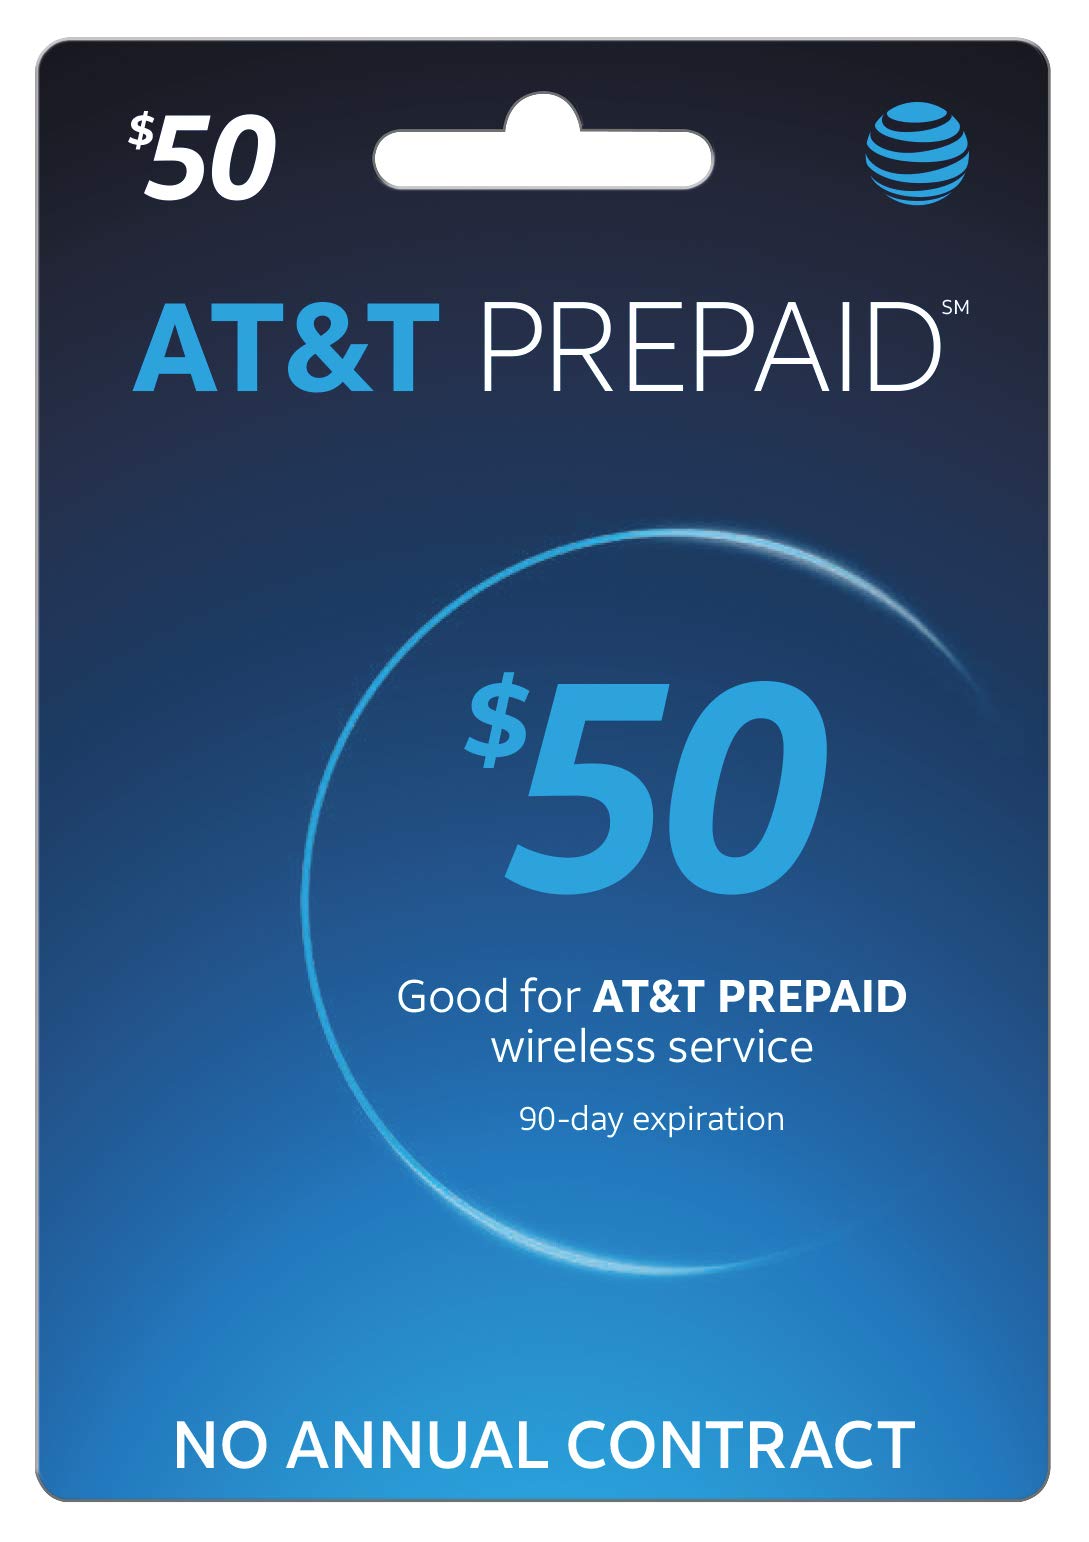 AT&T Prepaid $50.00 Prepaid Refill Card (Mail delivery)